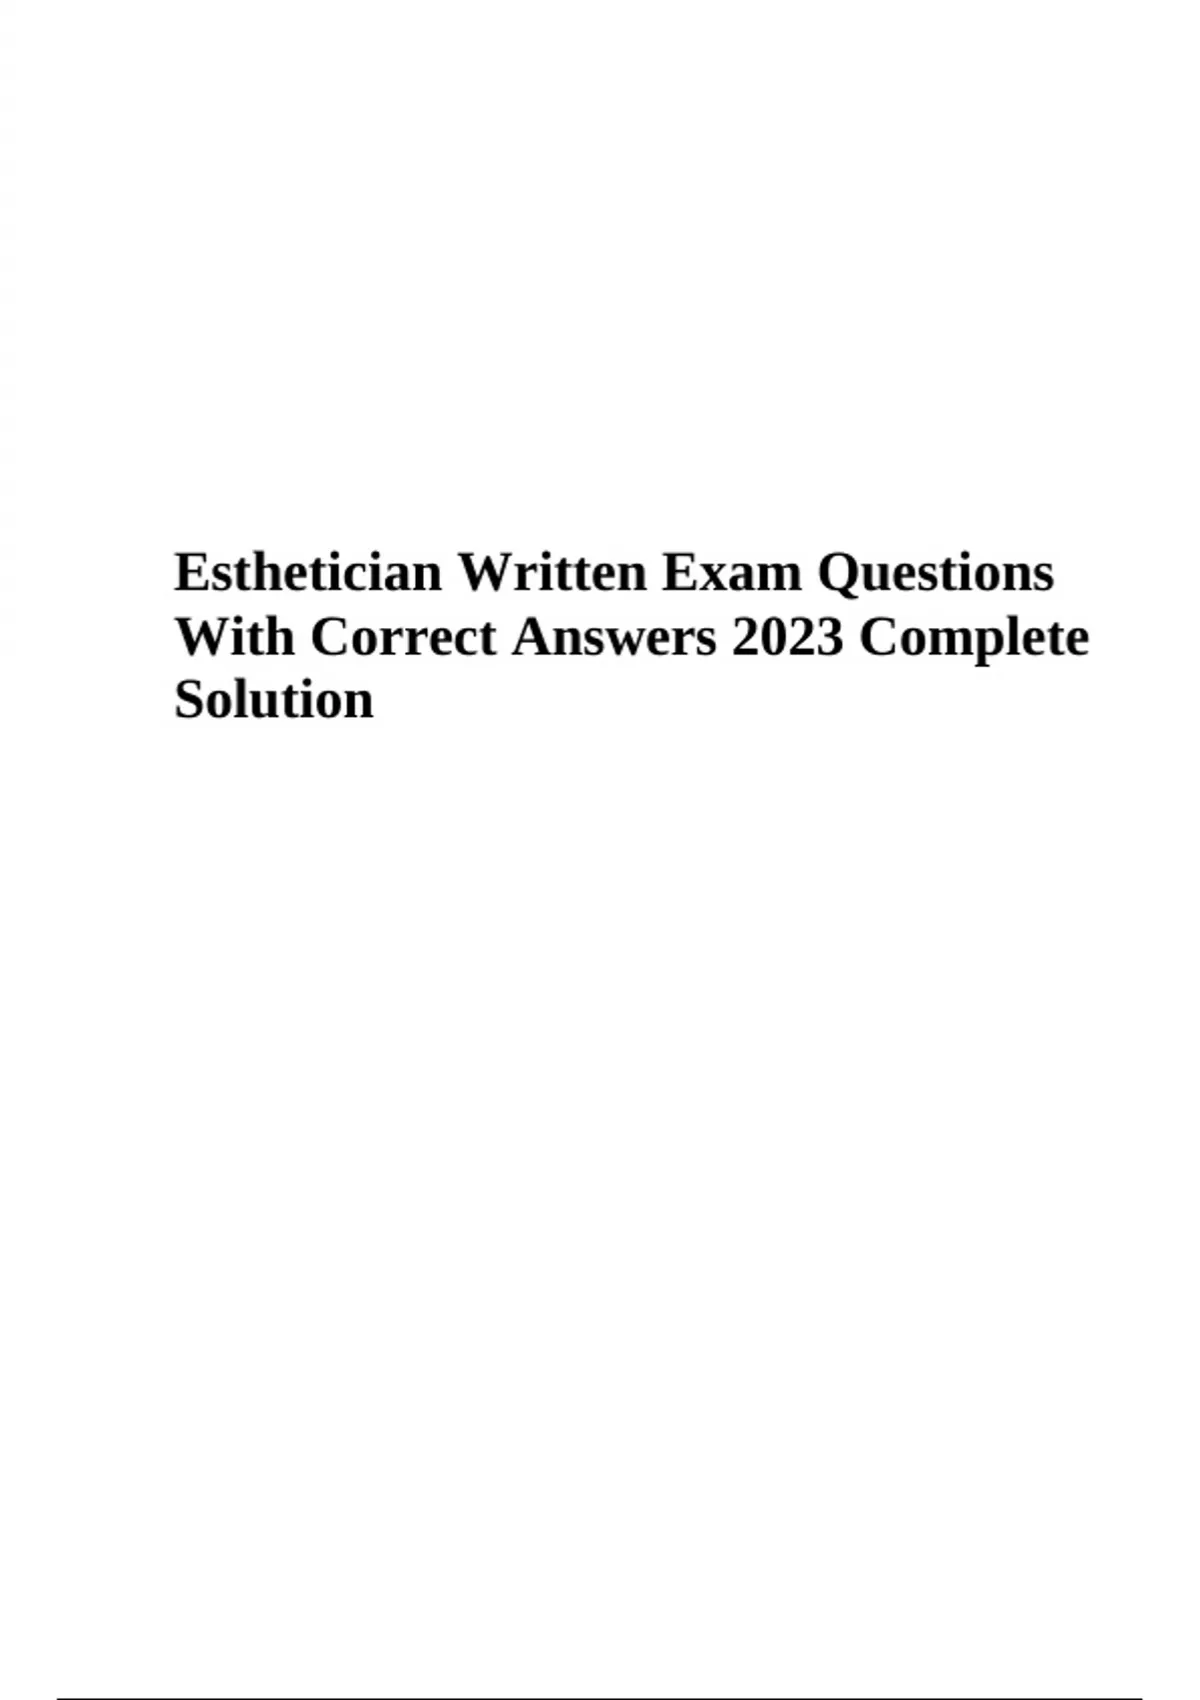 Esthetician Written Exam Questions With Correct Answers 2023 Complete